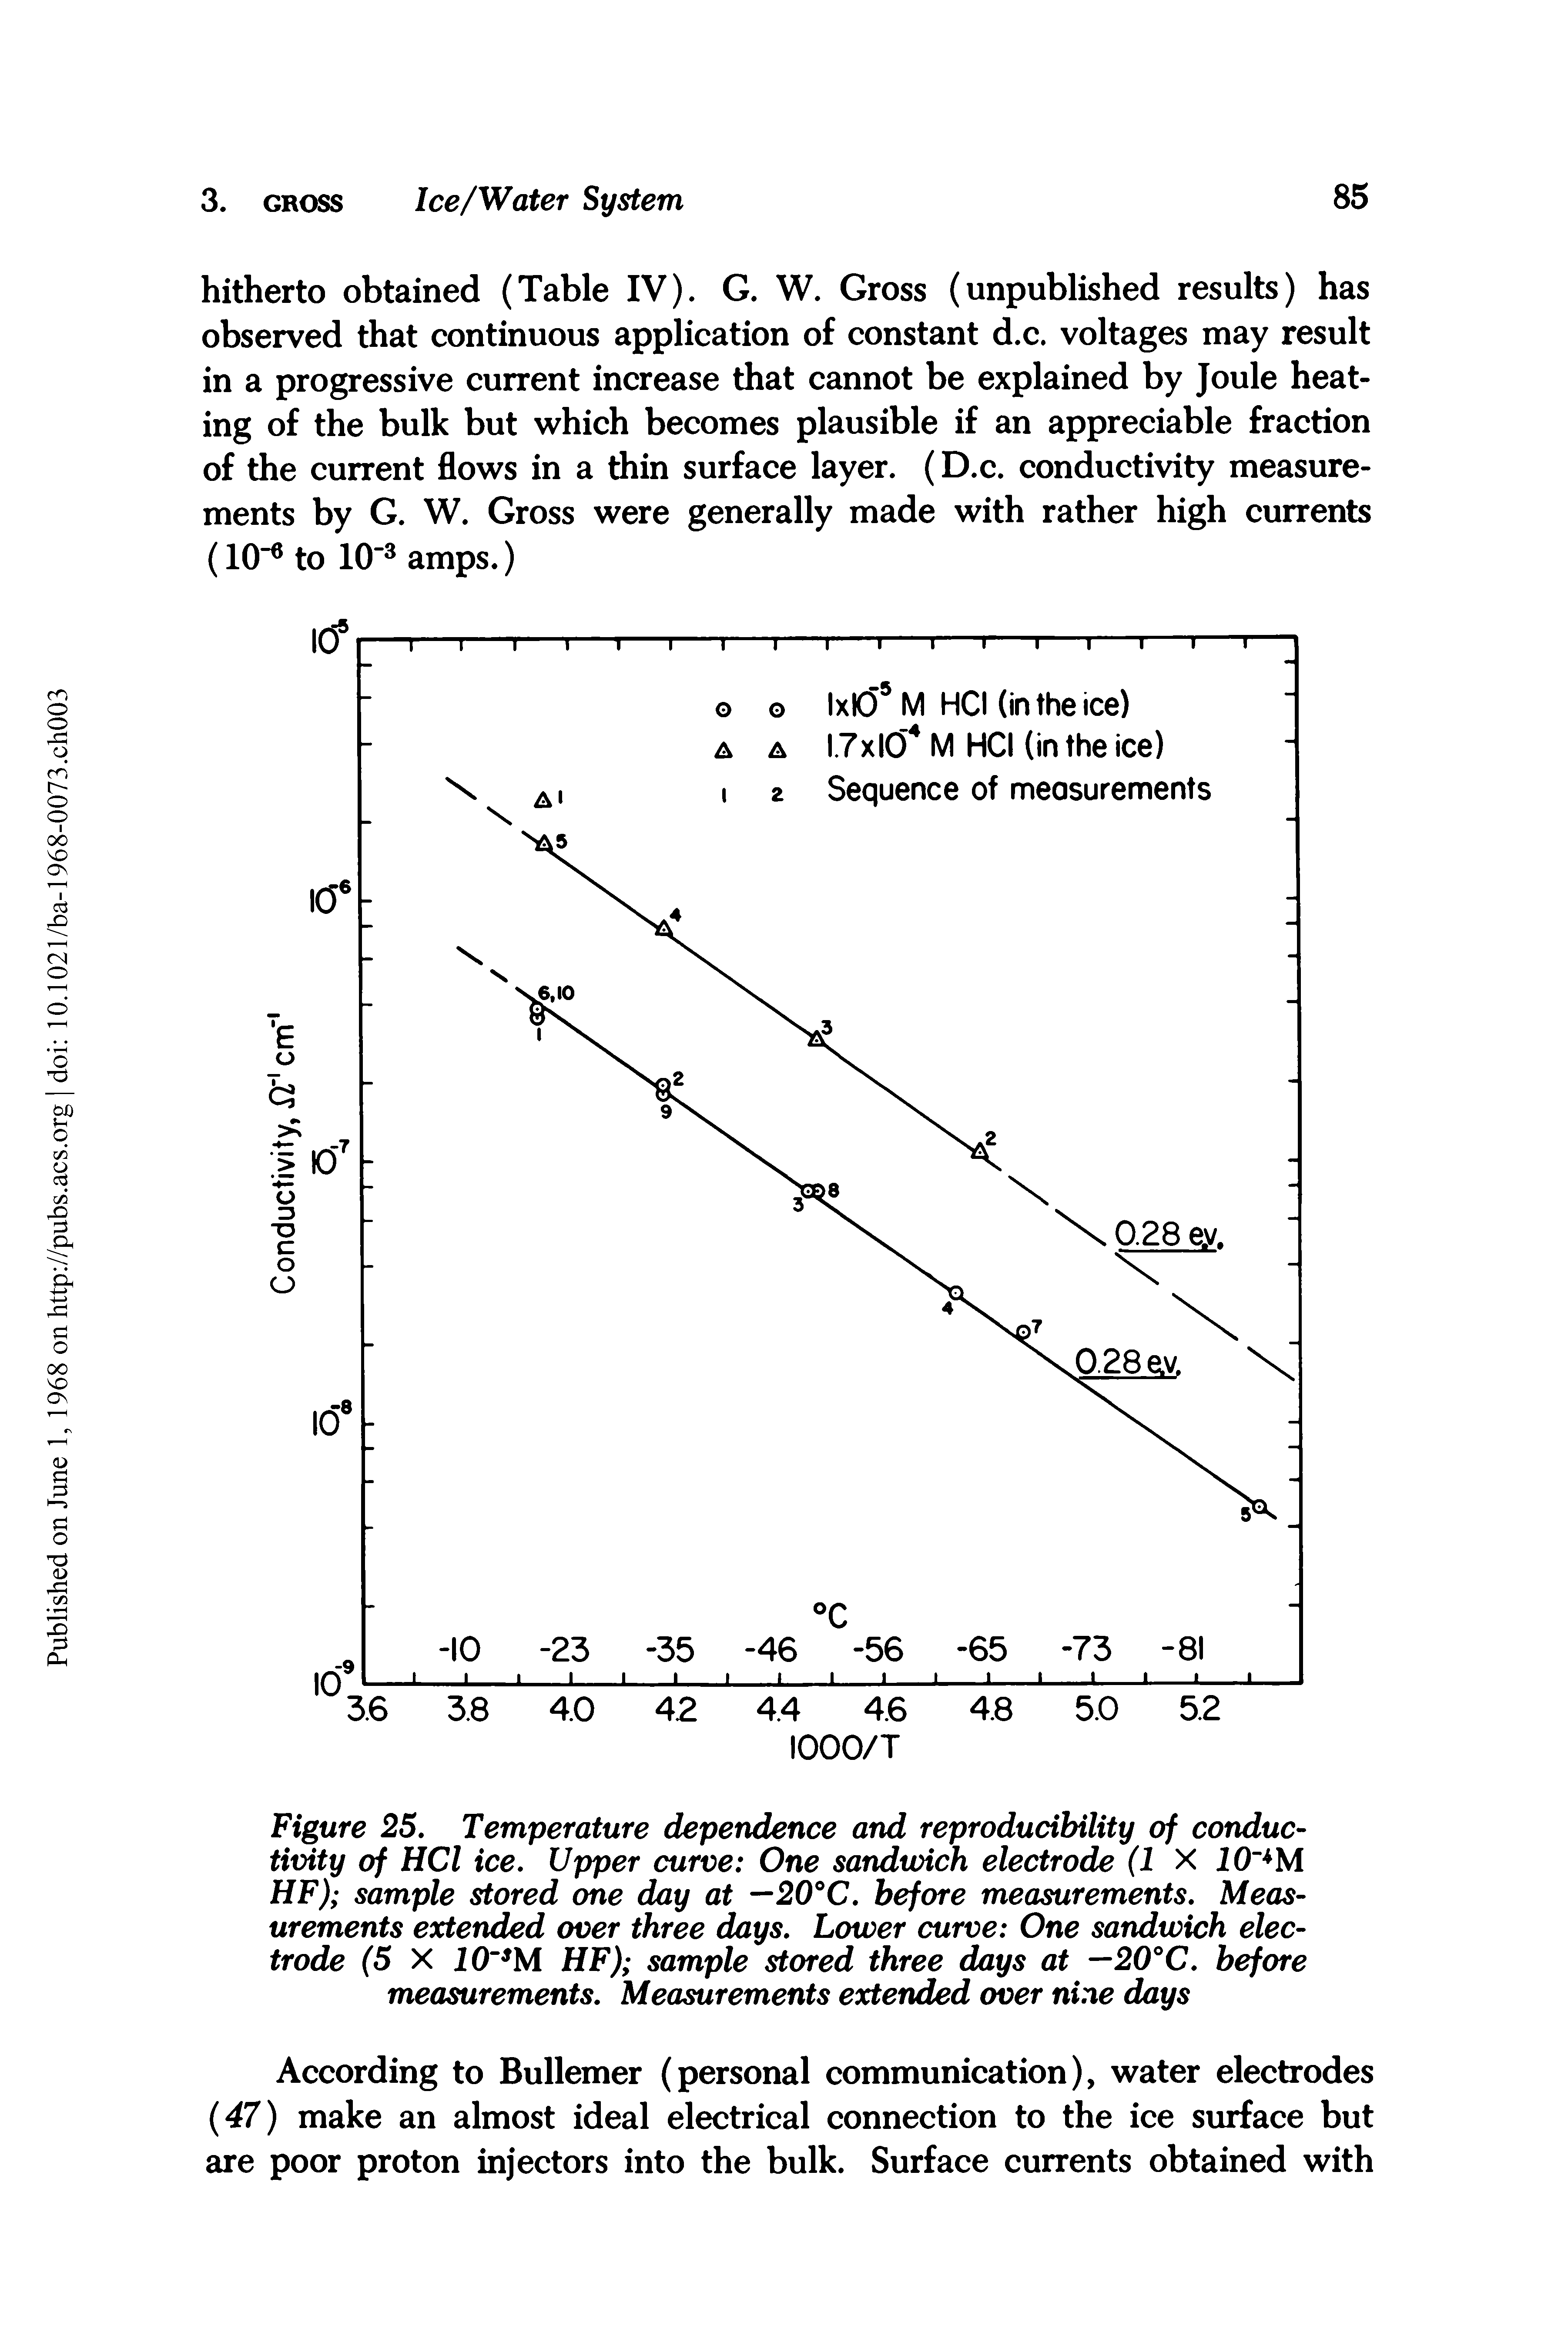 Figure 25, Temperature dependence and reproducibility of conductivity of HCl ice. Upper curve One sandwich electrode (IX 10 M HF) sample stored one day at —20 C. before measurements. Measurements extended over three days. Lower curve One sandwich electrode (5 X I0" M HF) sample stored three days at —20°C, before measurements. Measurements extended over nine days...